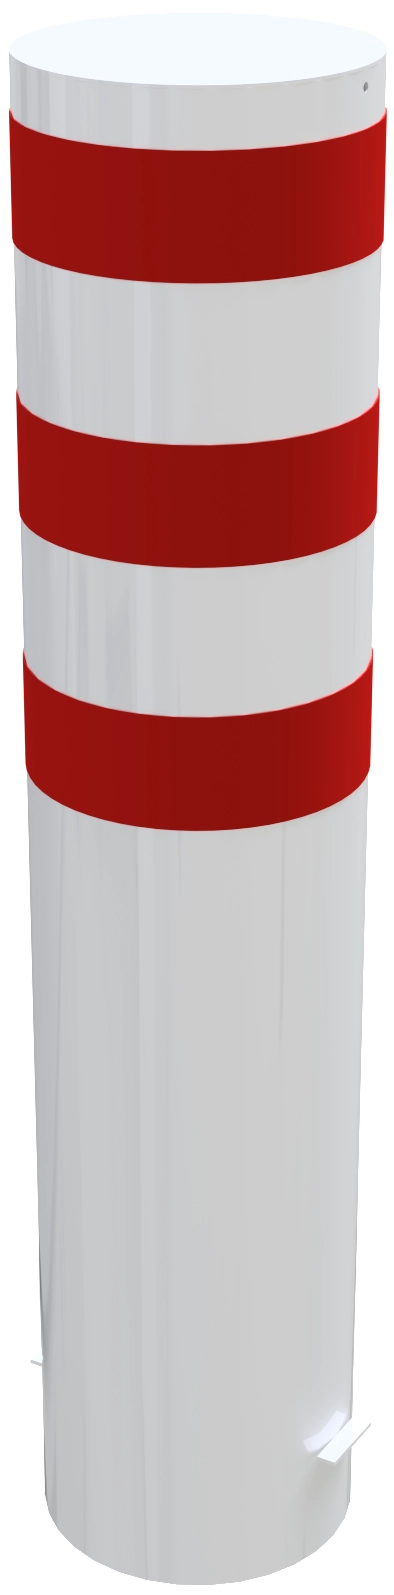 Parkeerpalen - Rampaal-rood-wit-323mm-1500mm